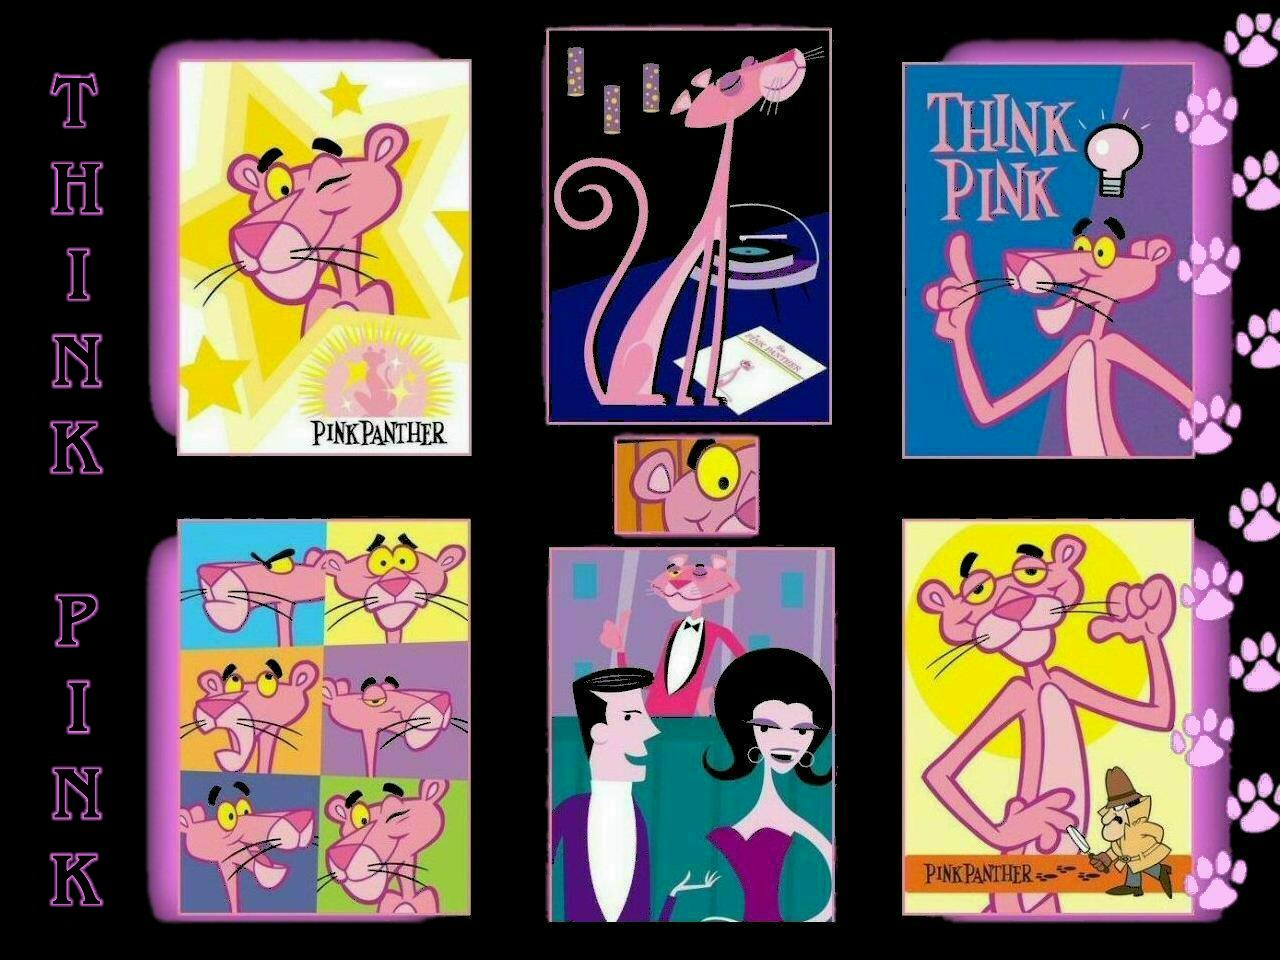 Think Pink via The Pink Panther